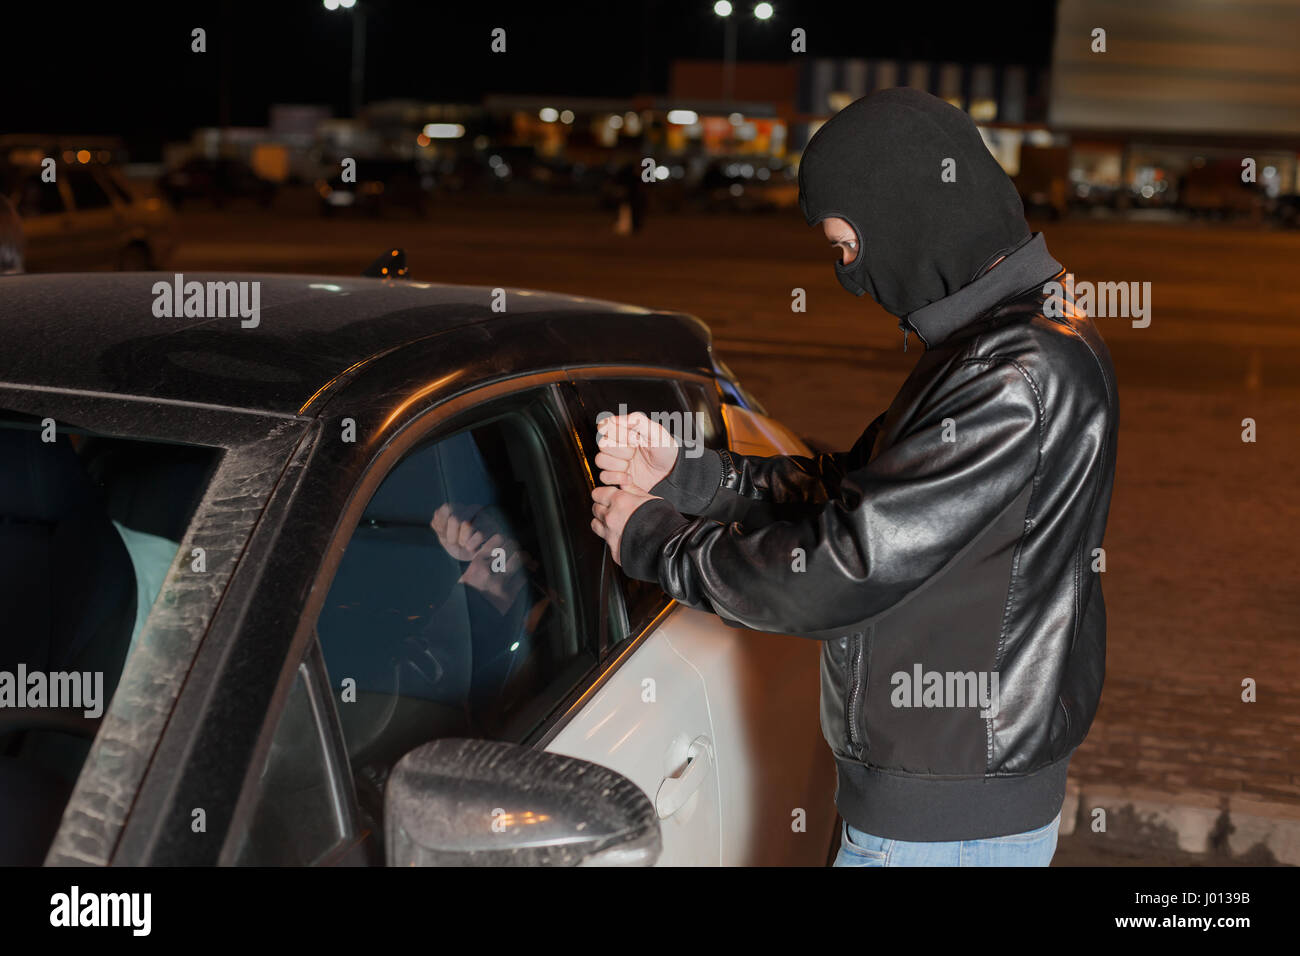 Male carjacker with balaclava on his head trying to open car door with ruler. Thief unlock vehicle. Auto transport insurance marketing Stock Photo